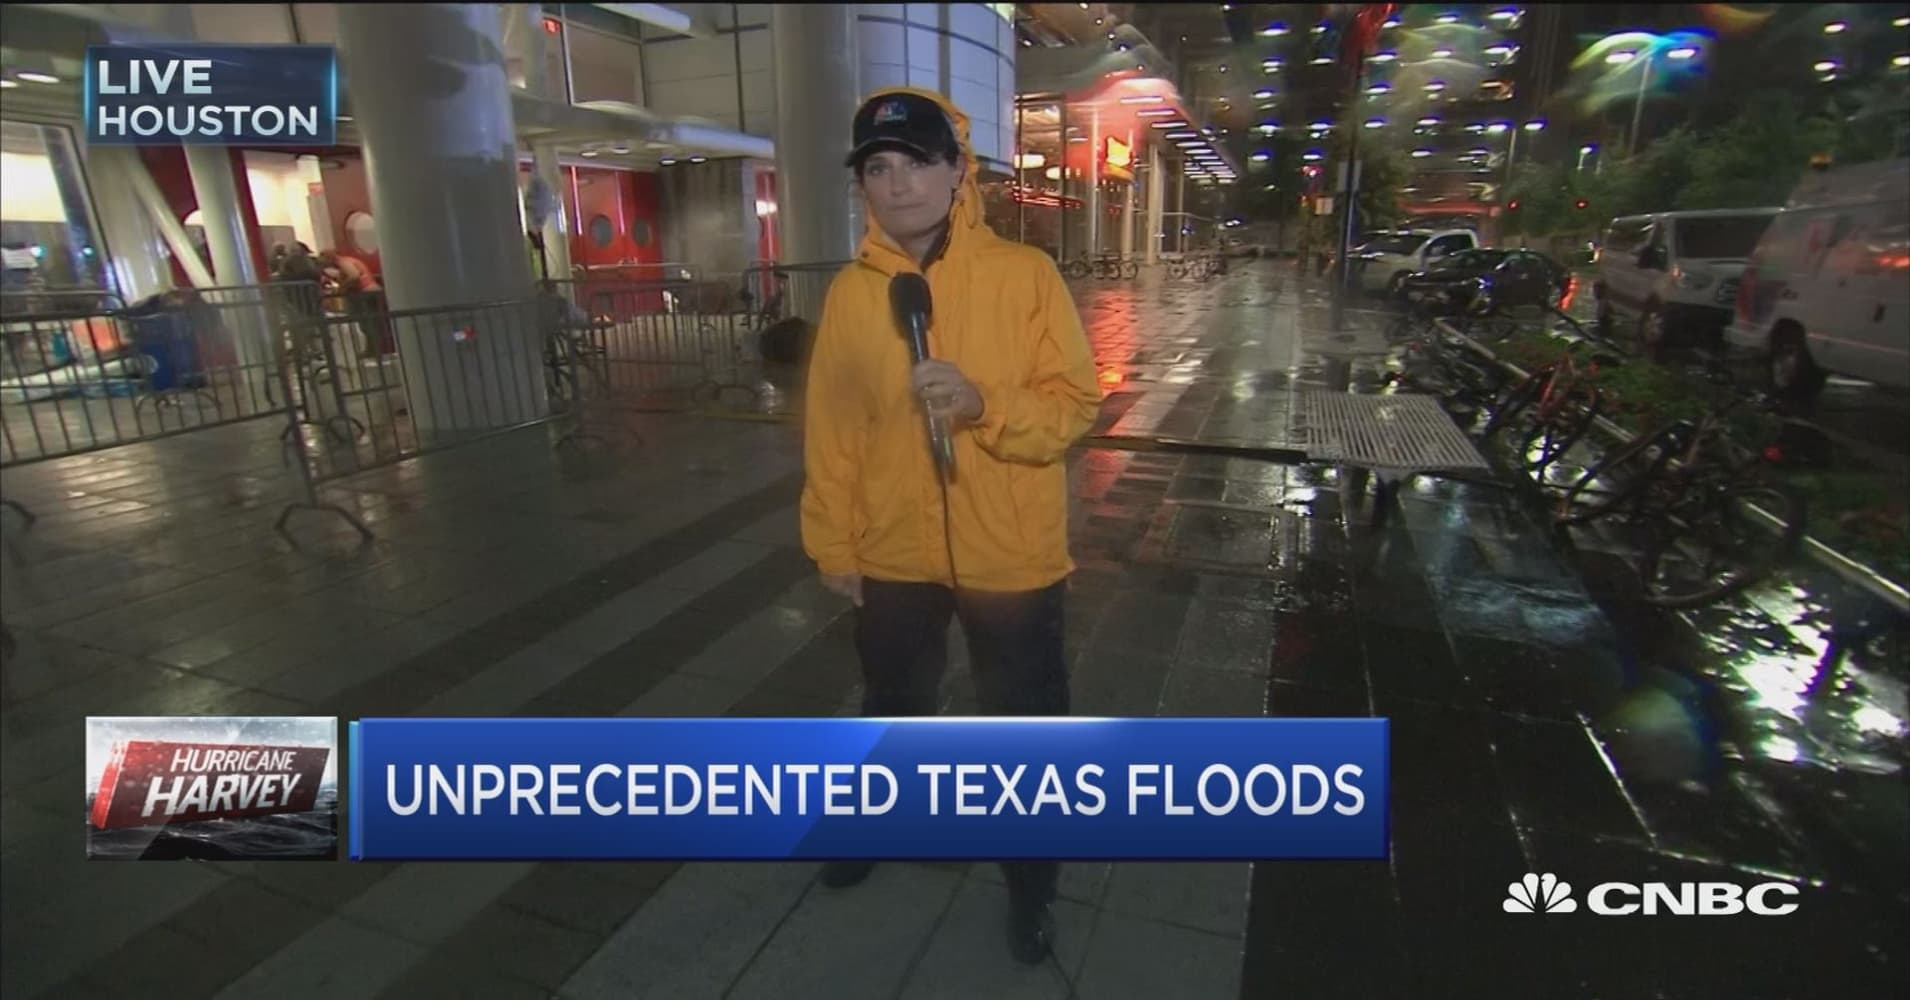 More rain forecasted as historic floods hits Texas